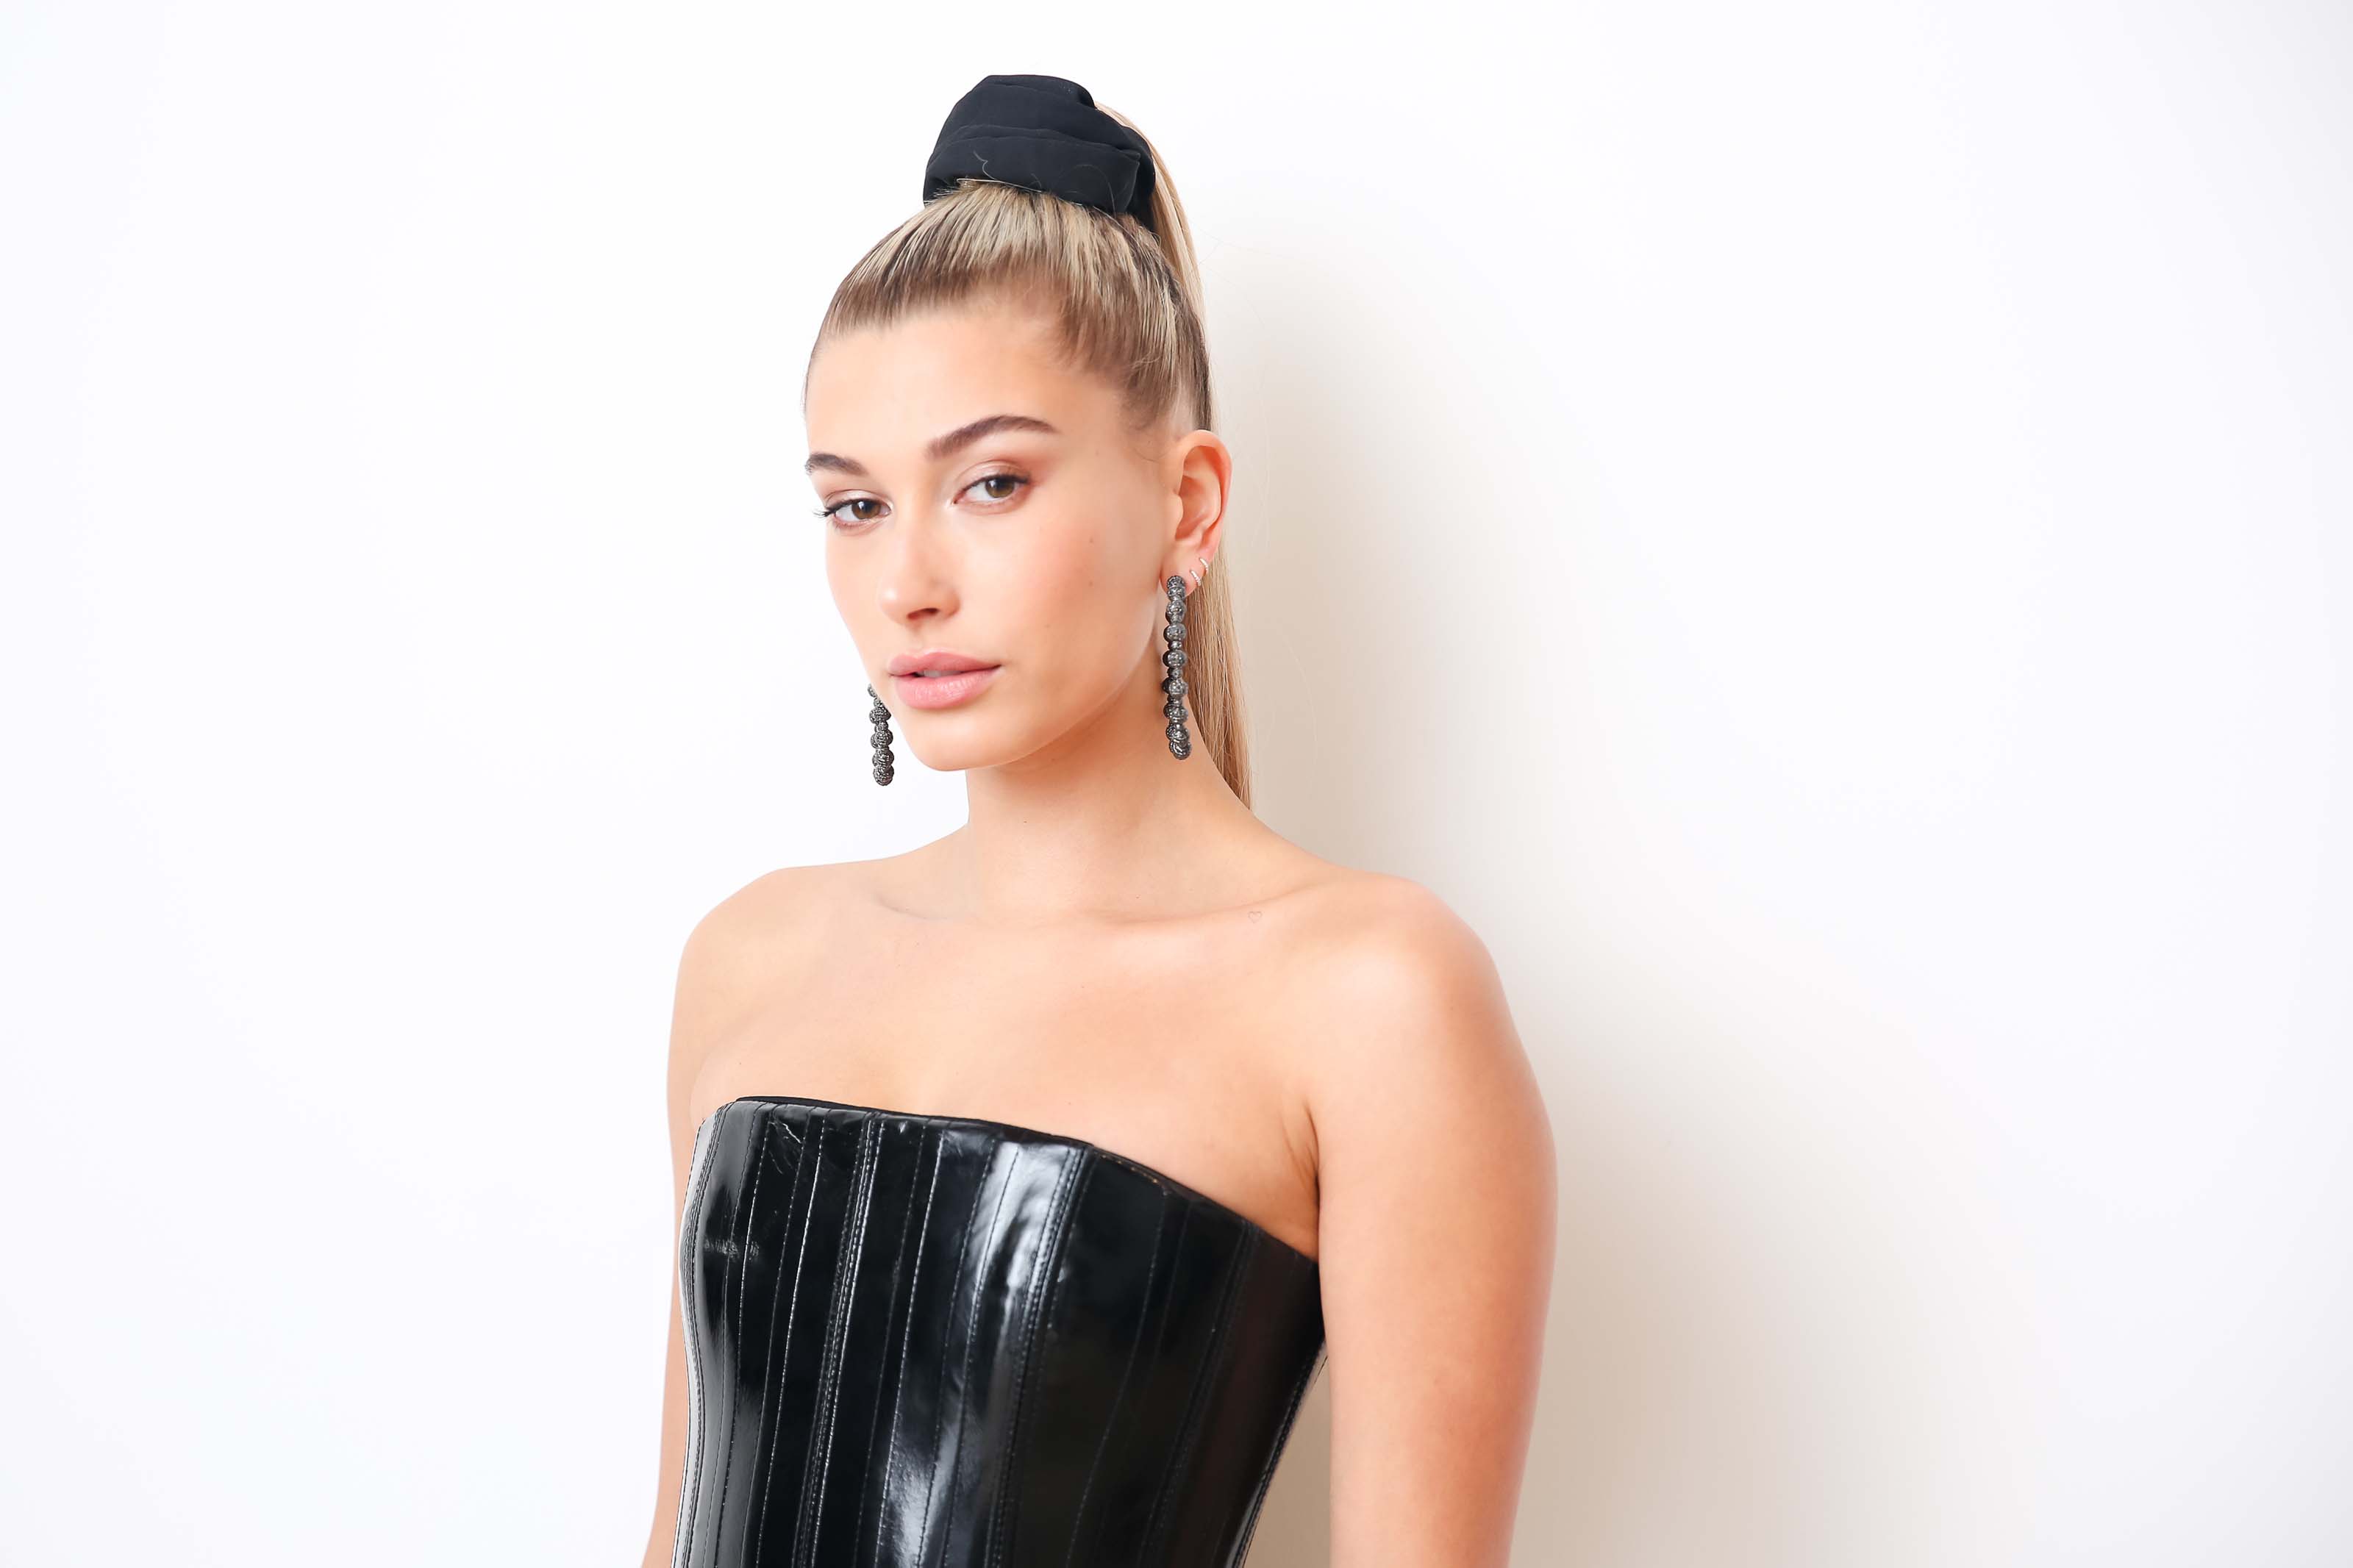 Hailey Baldwin attends The Whitney Museum Gala